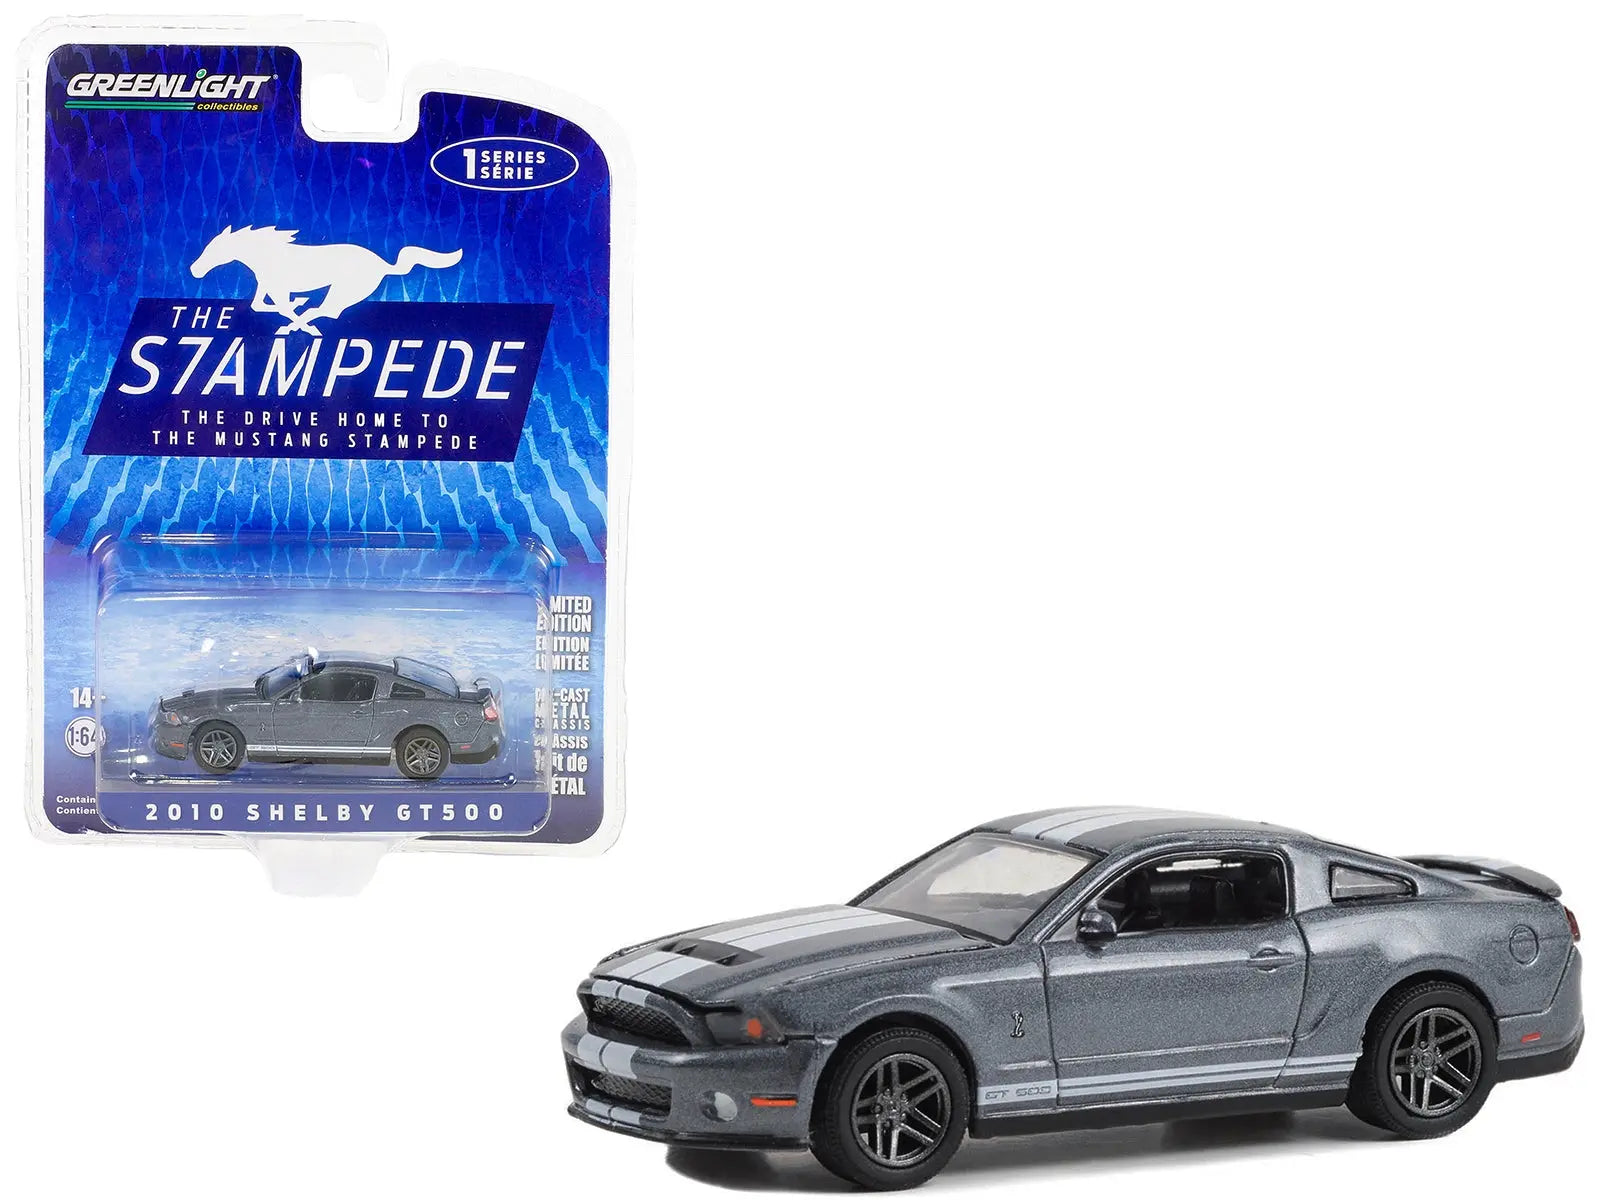 2010 Shelby GT500 Sterling Gray Metallic with White Stripes "The Drive Home to the Mustang Stampede" Series 1 1/64 Diecast Model Car by Greenlight Greenlight